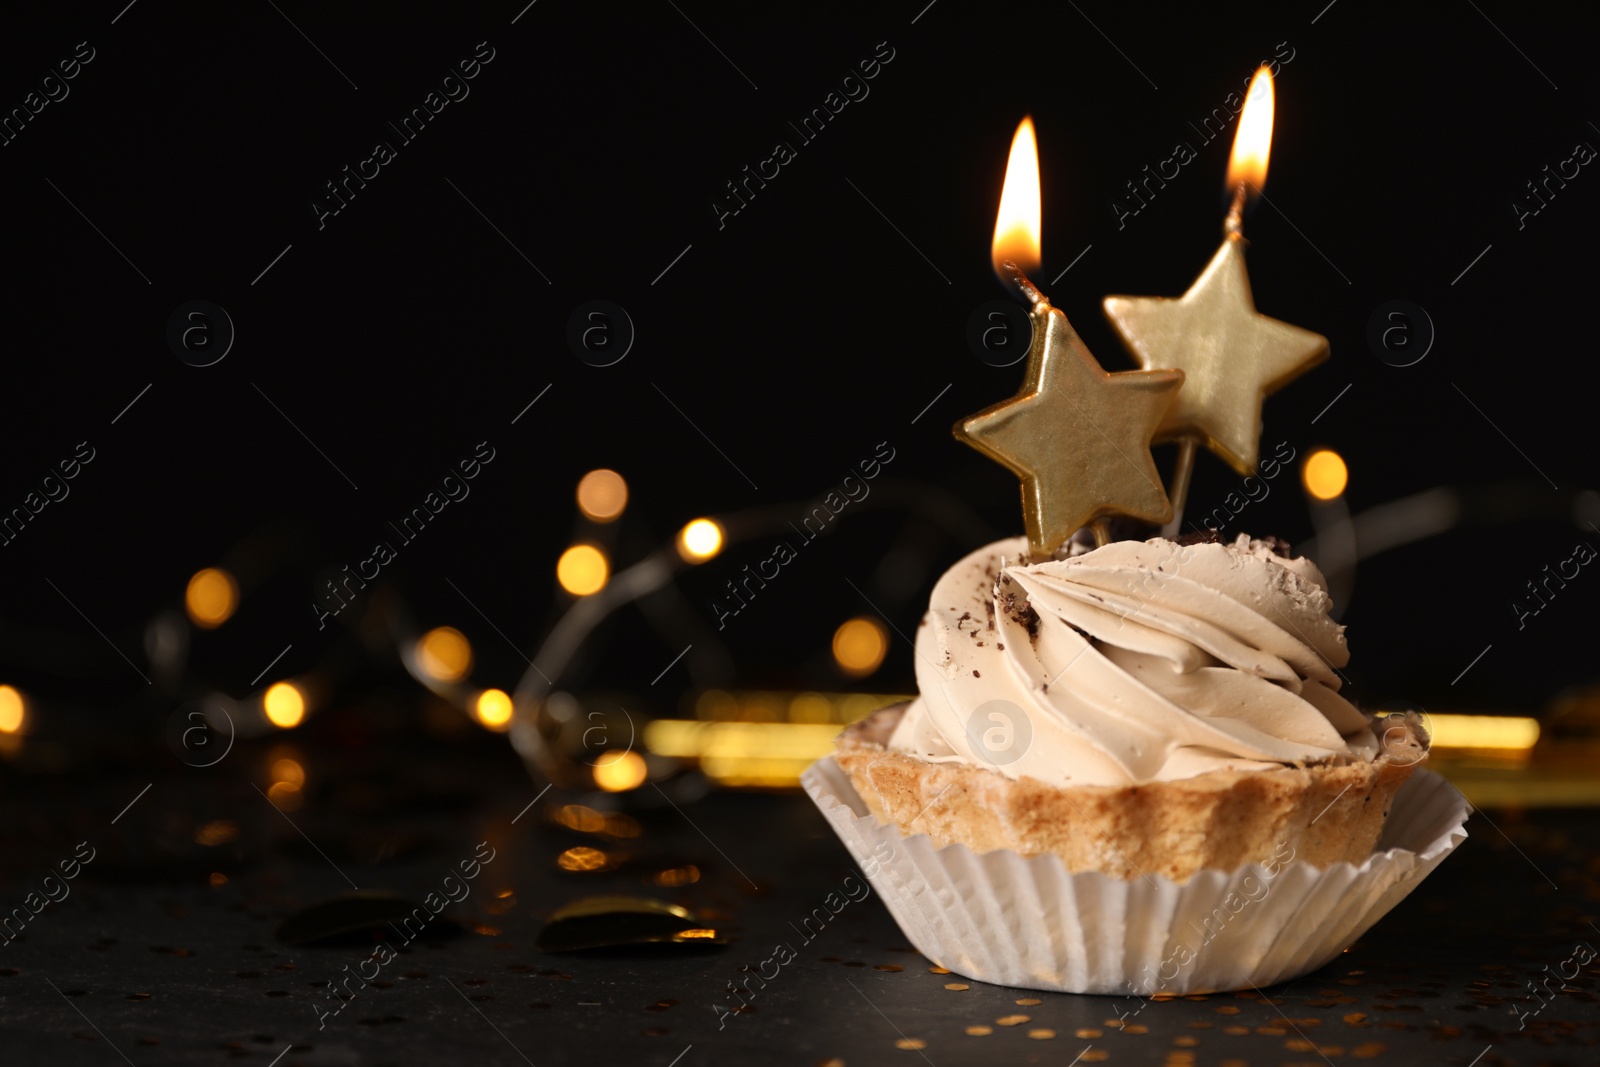 Photo of Birthday cupcake with candles on table against black background, space for text